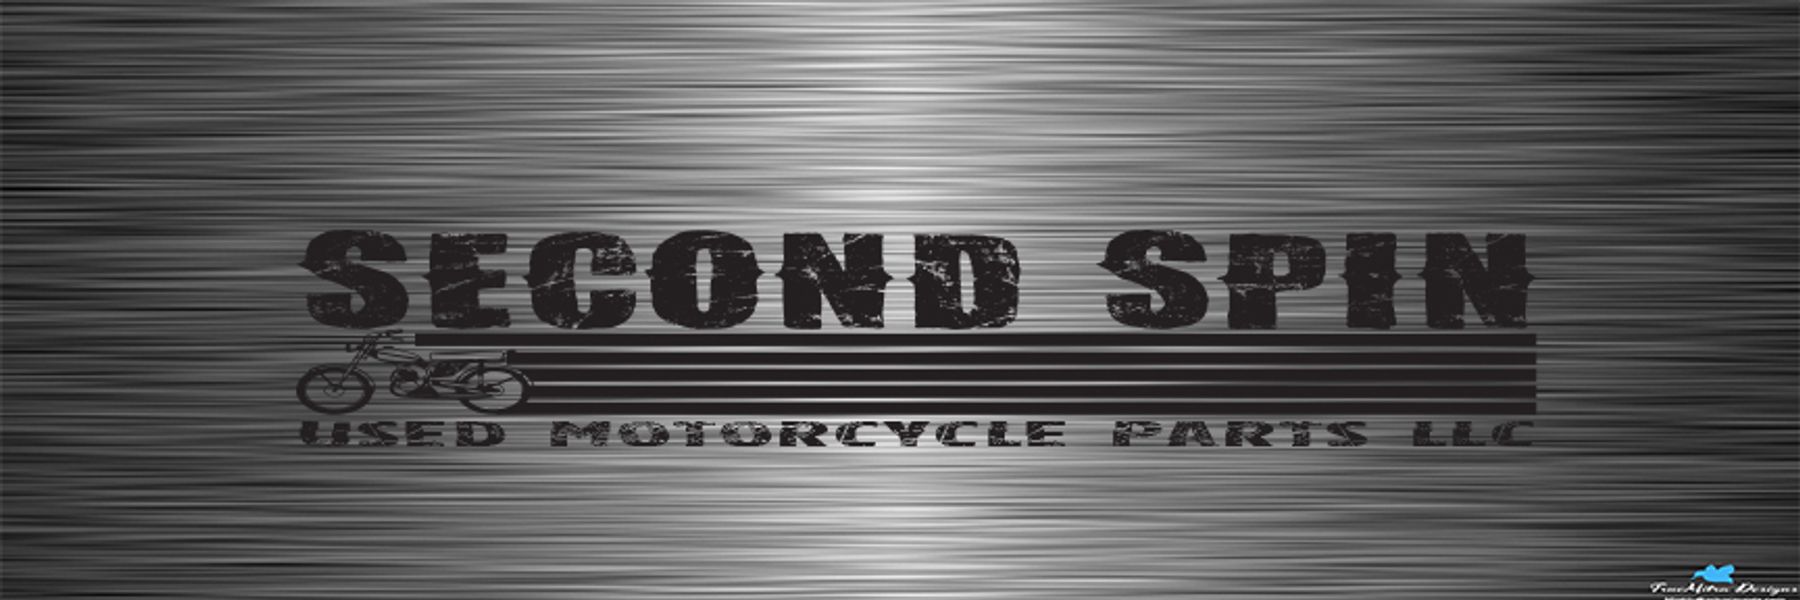 New and Used Motorcycle Parts